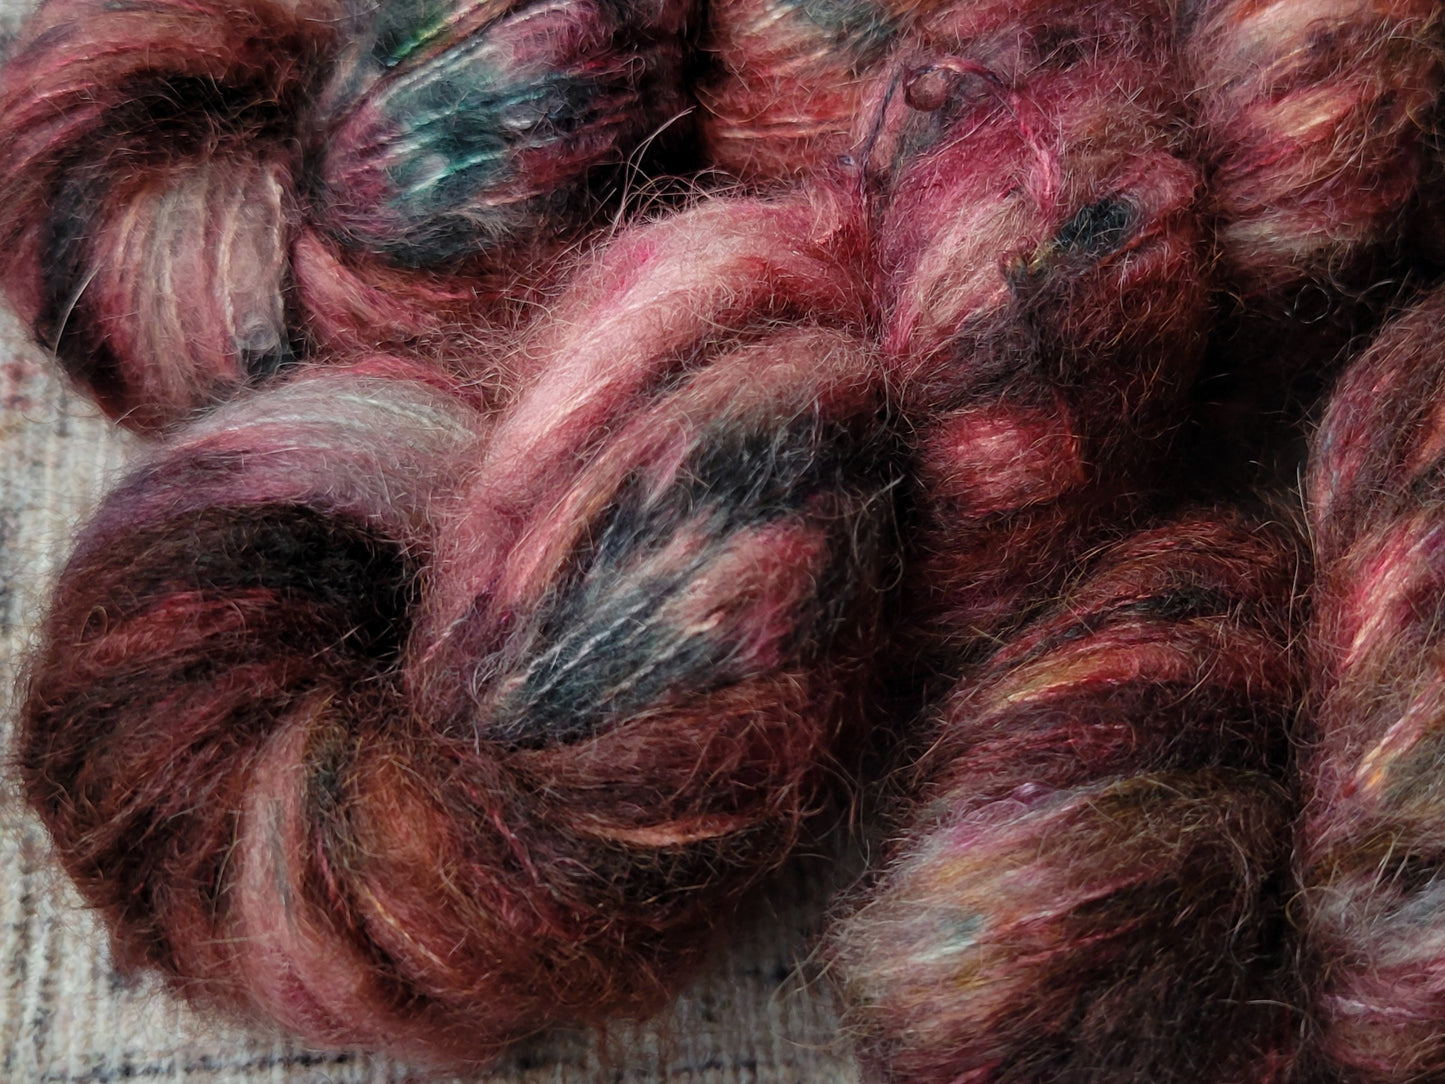 Beautiful Disaster - Dyed-To-Order